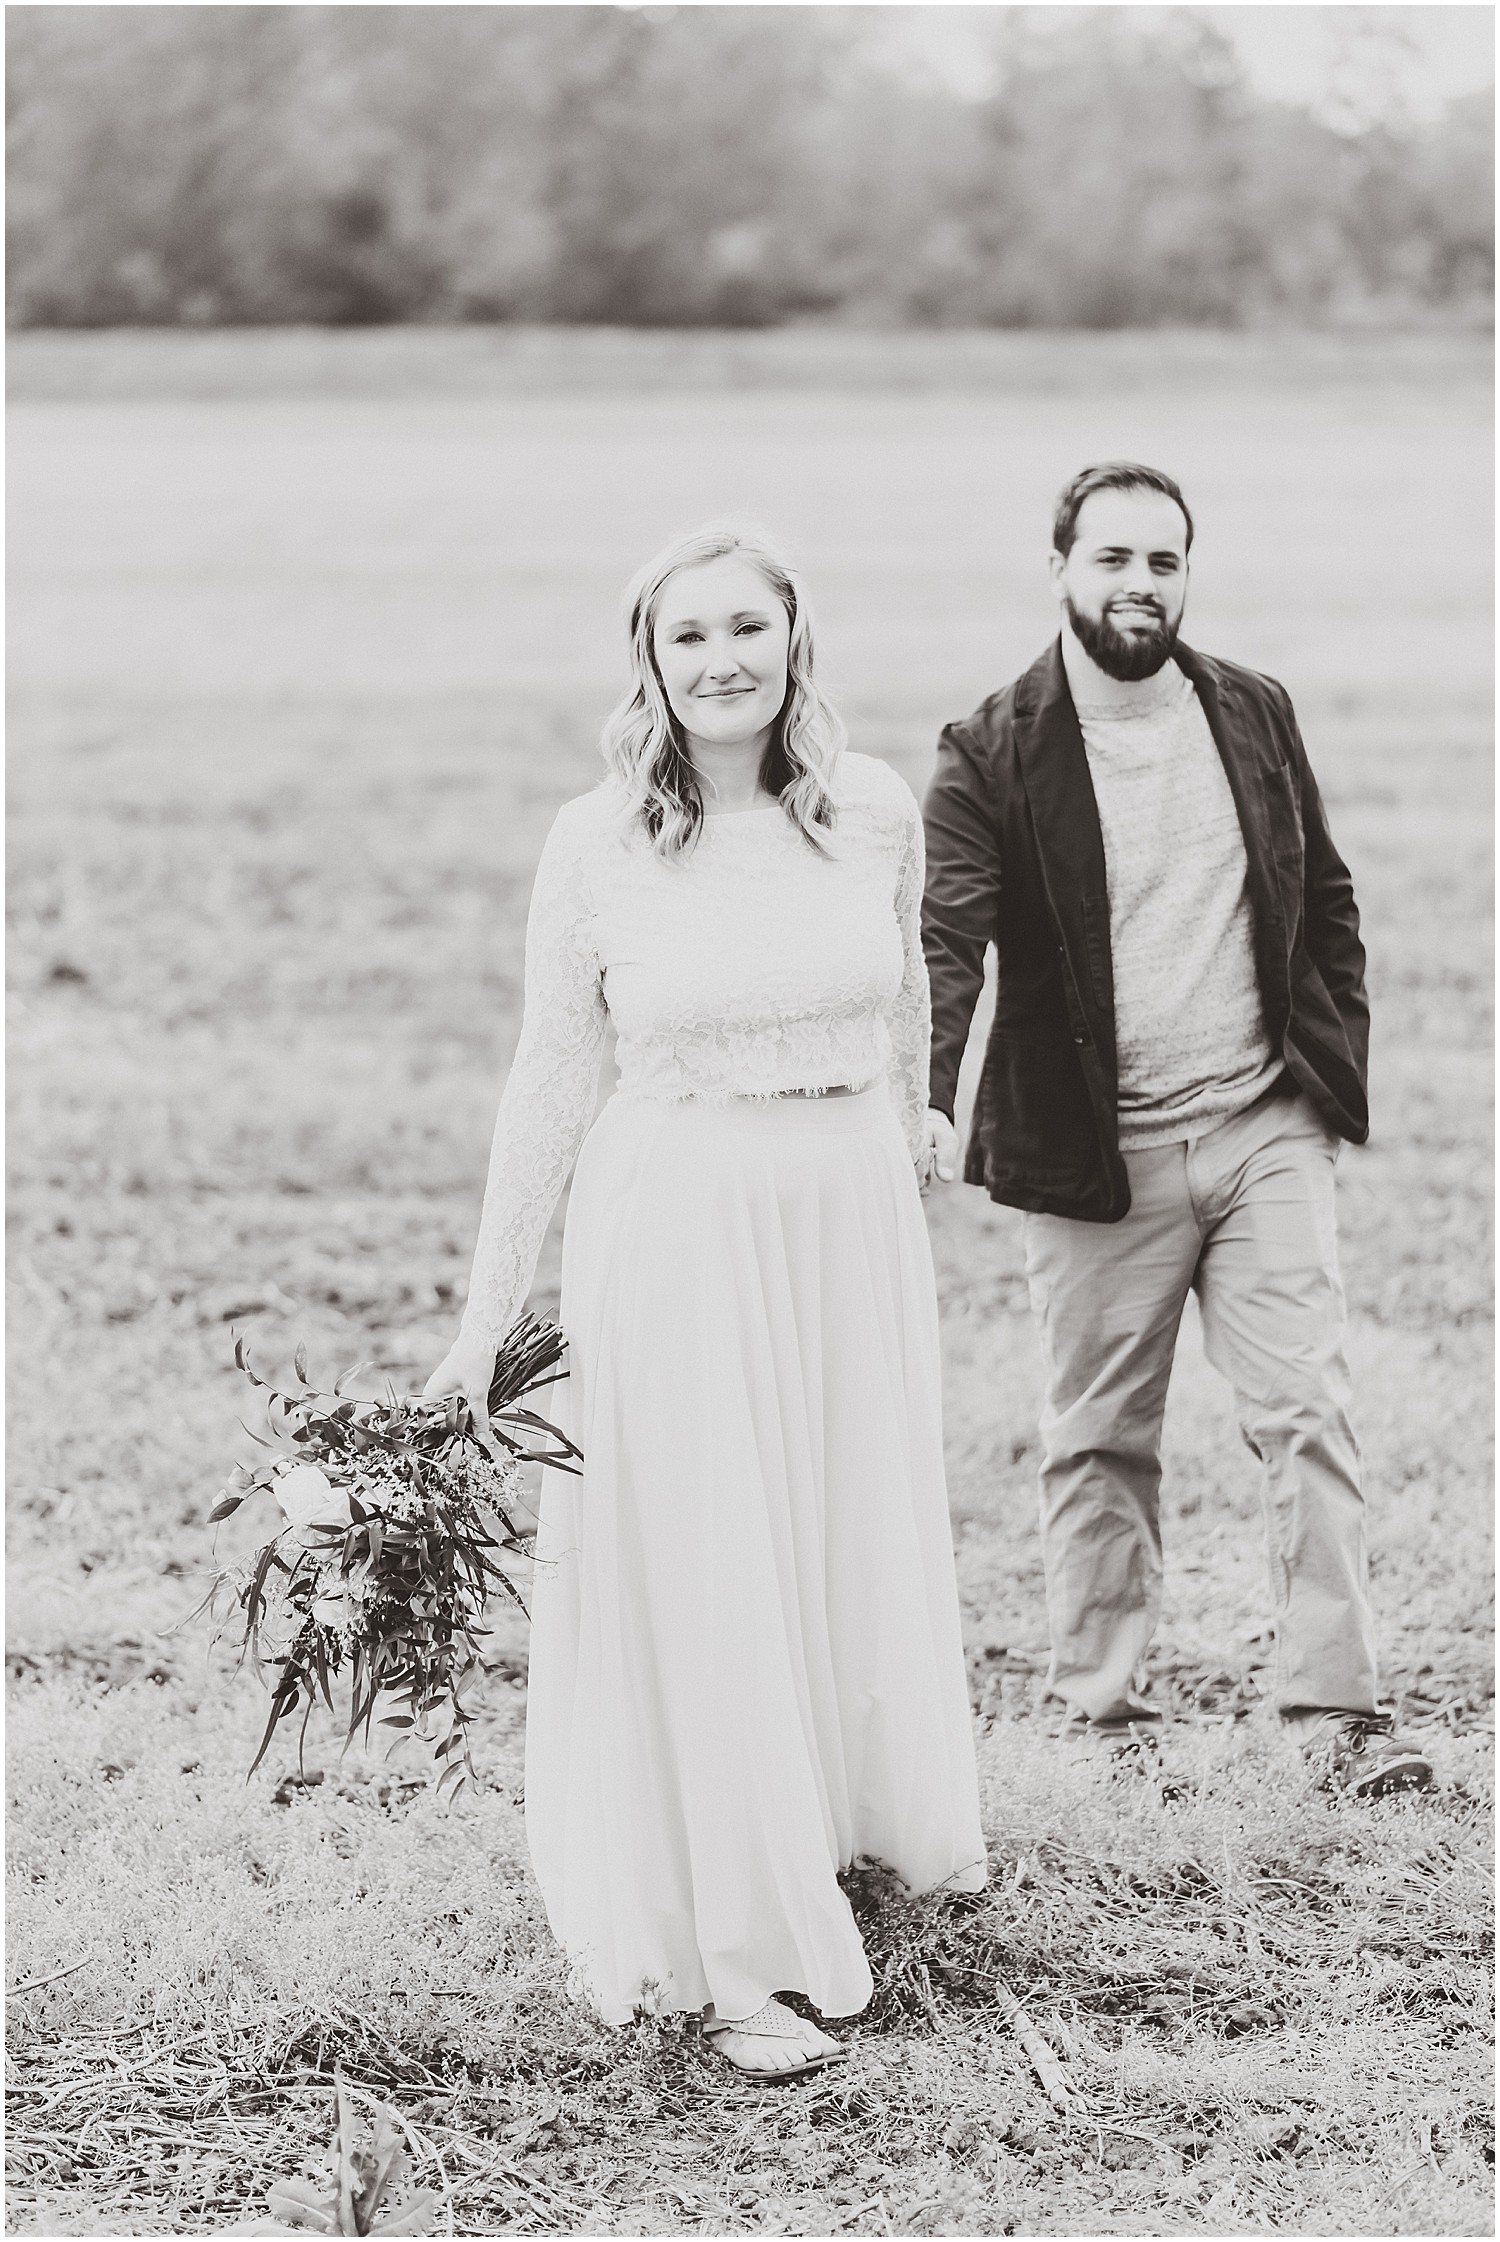 black and white image of couple walking next to each other in field holding bouquet